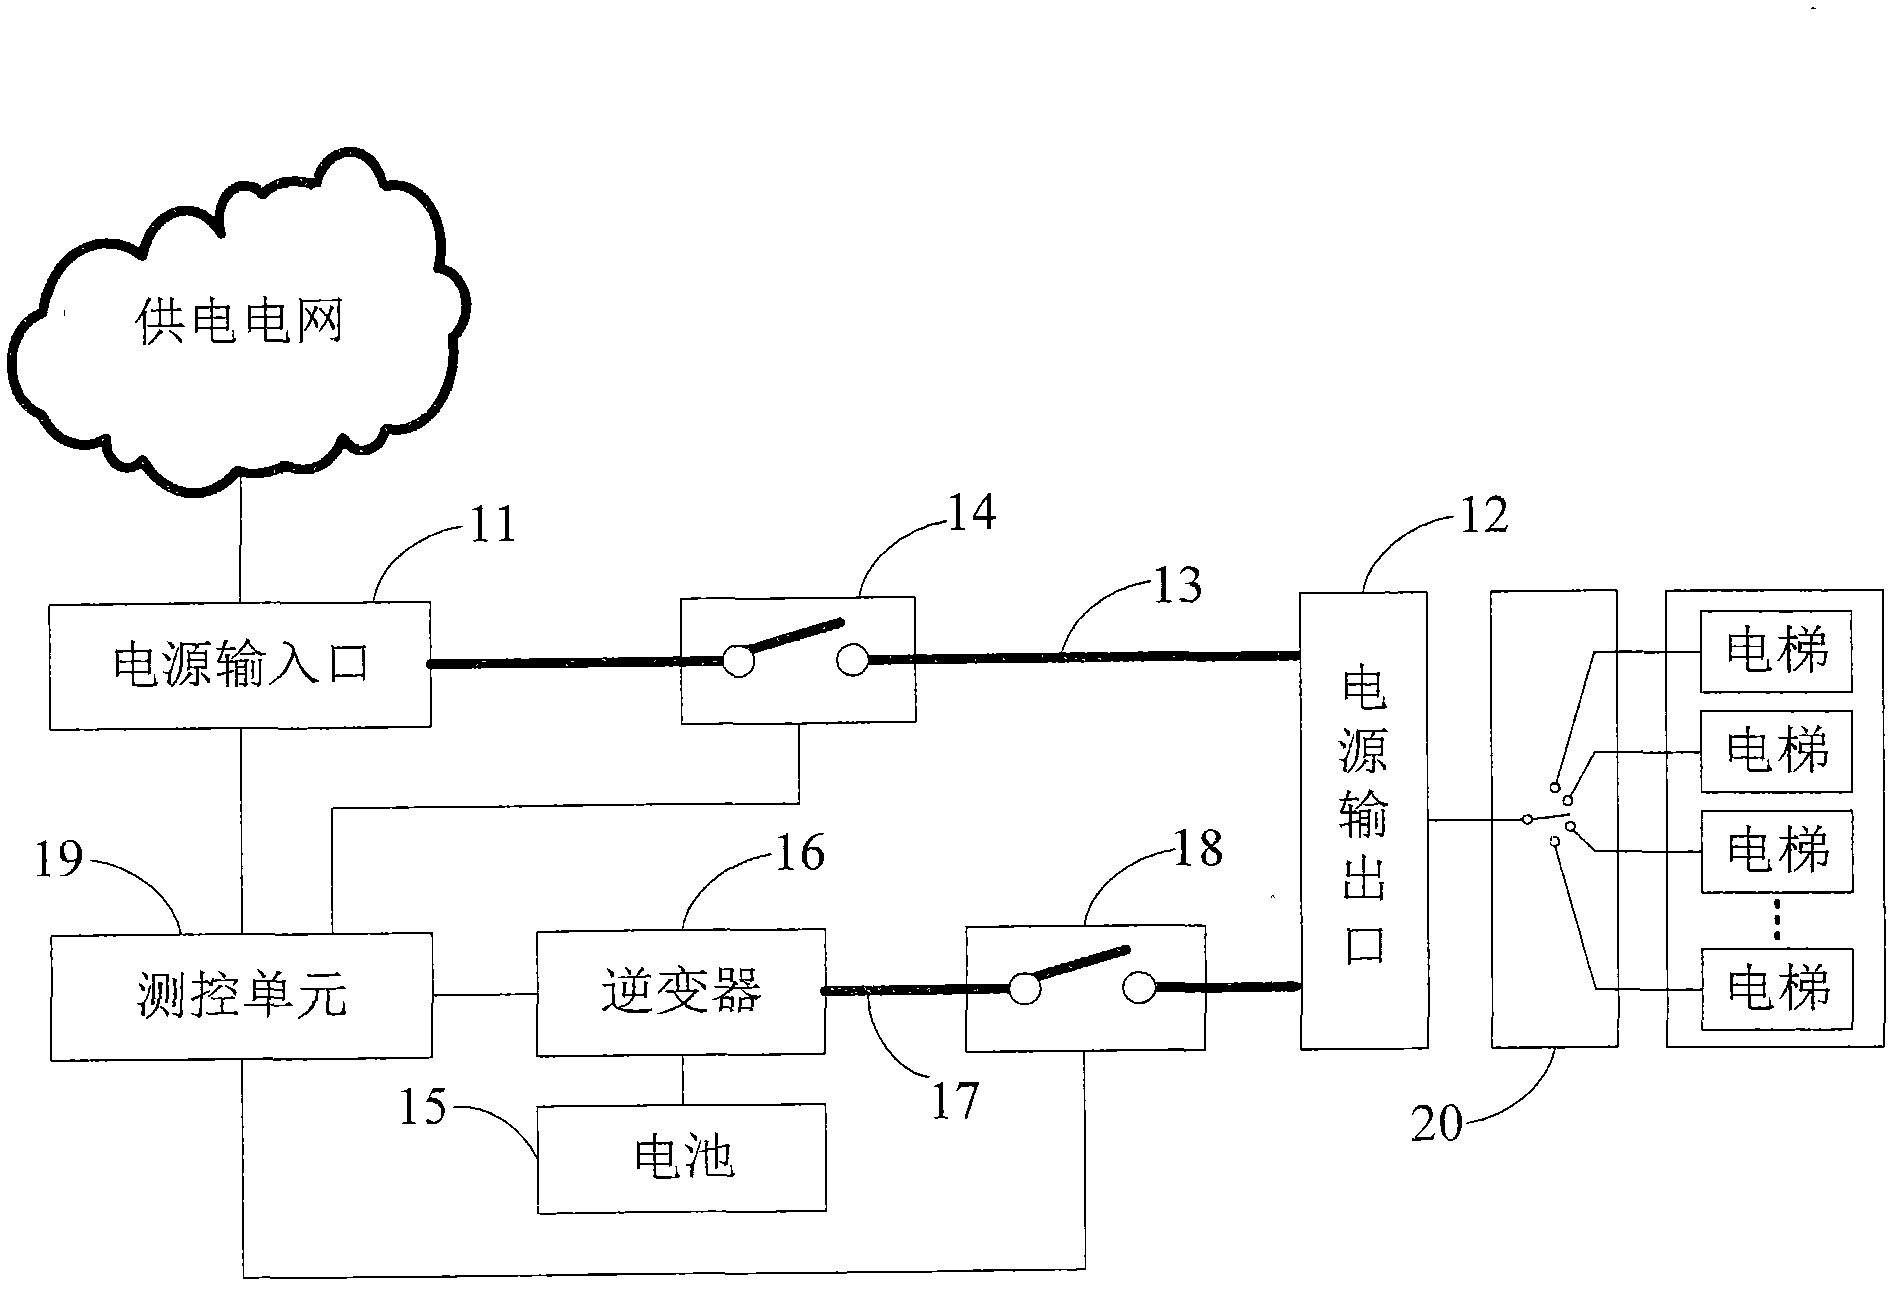 Emergency power supply device and method for lift